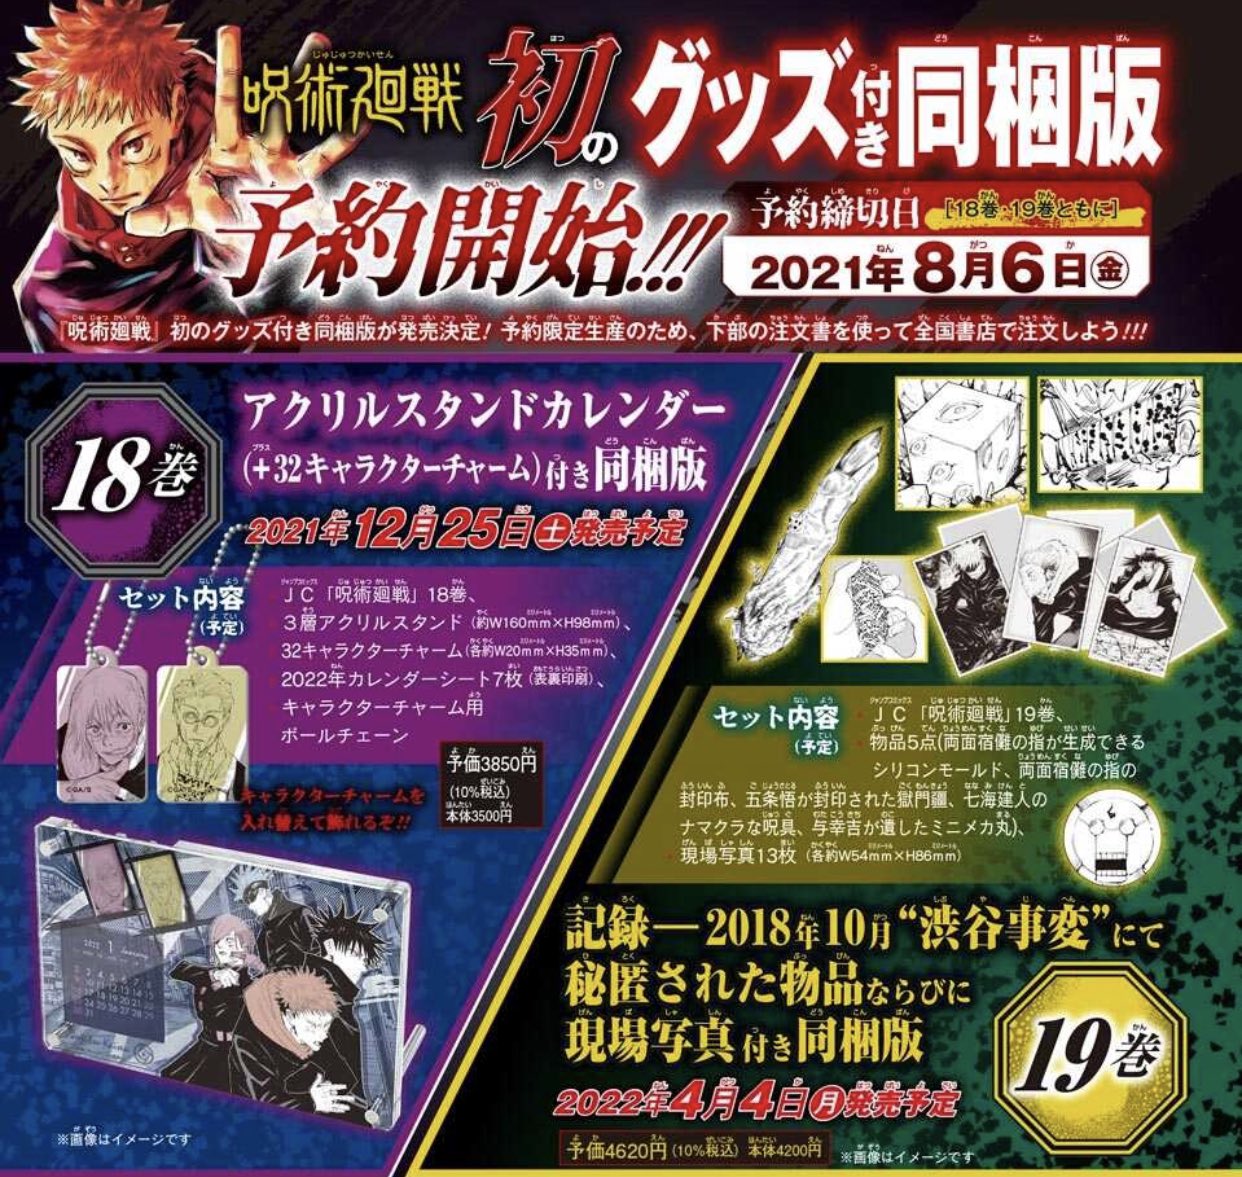 Jさん🏀( ֊' '֊) on X: thread of exciting Jujutsu Kaisen manga announcements!  VOL. 18 release date: 12/25/2021 VOL. 19 release date: 4/4/2022 there will  be special, exclusive merchandise bundles up for preorder